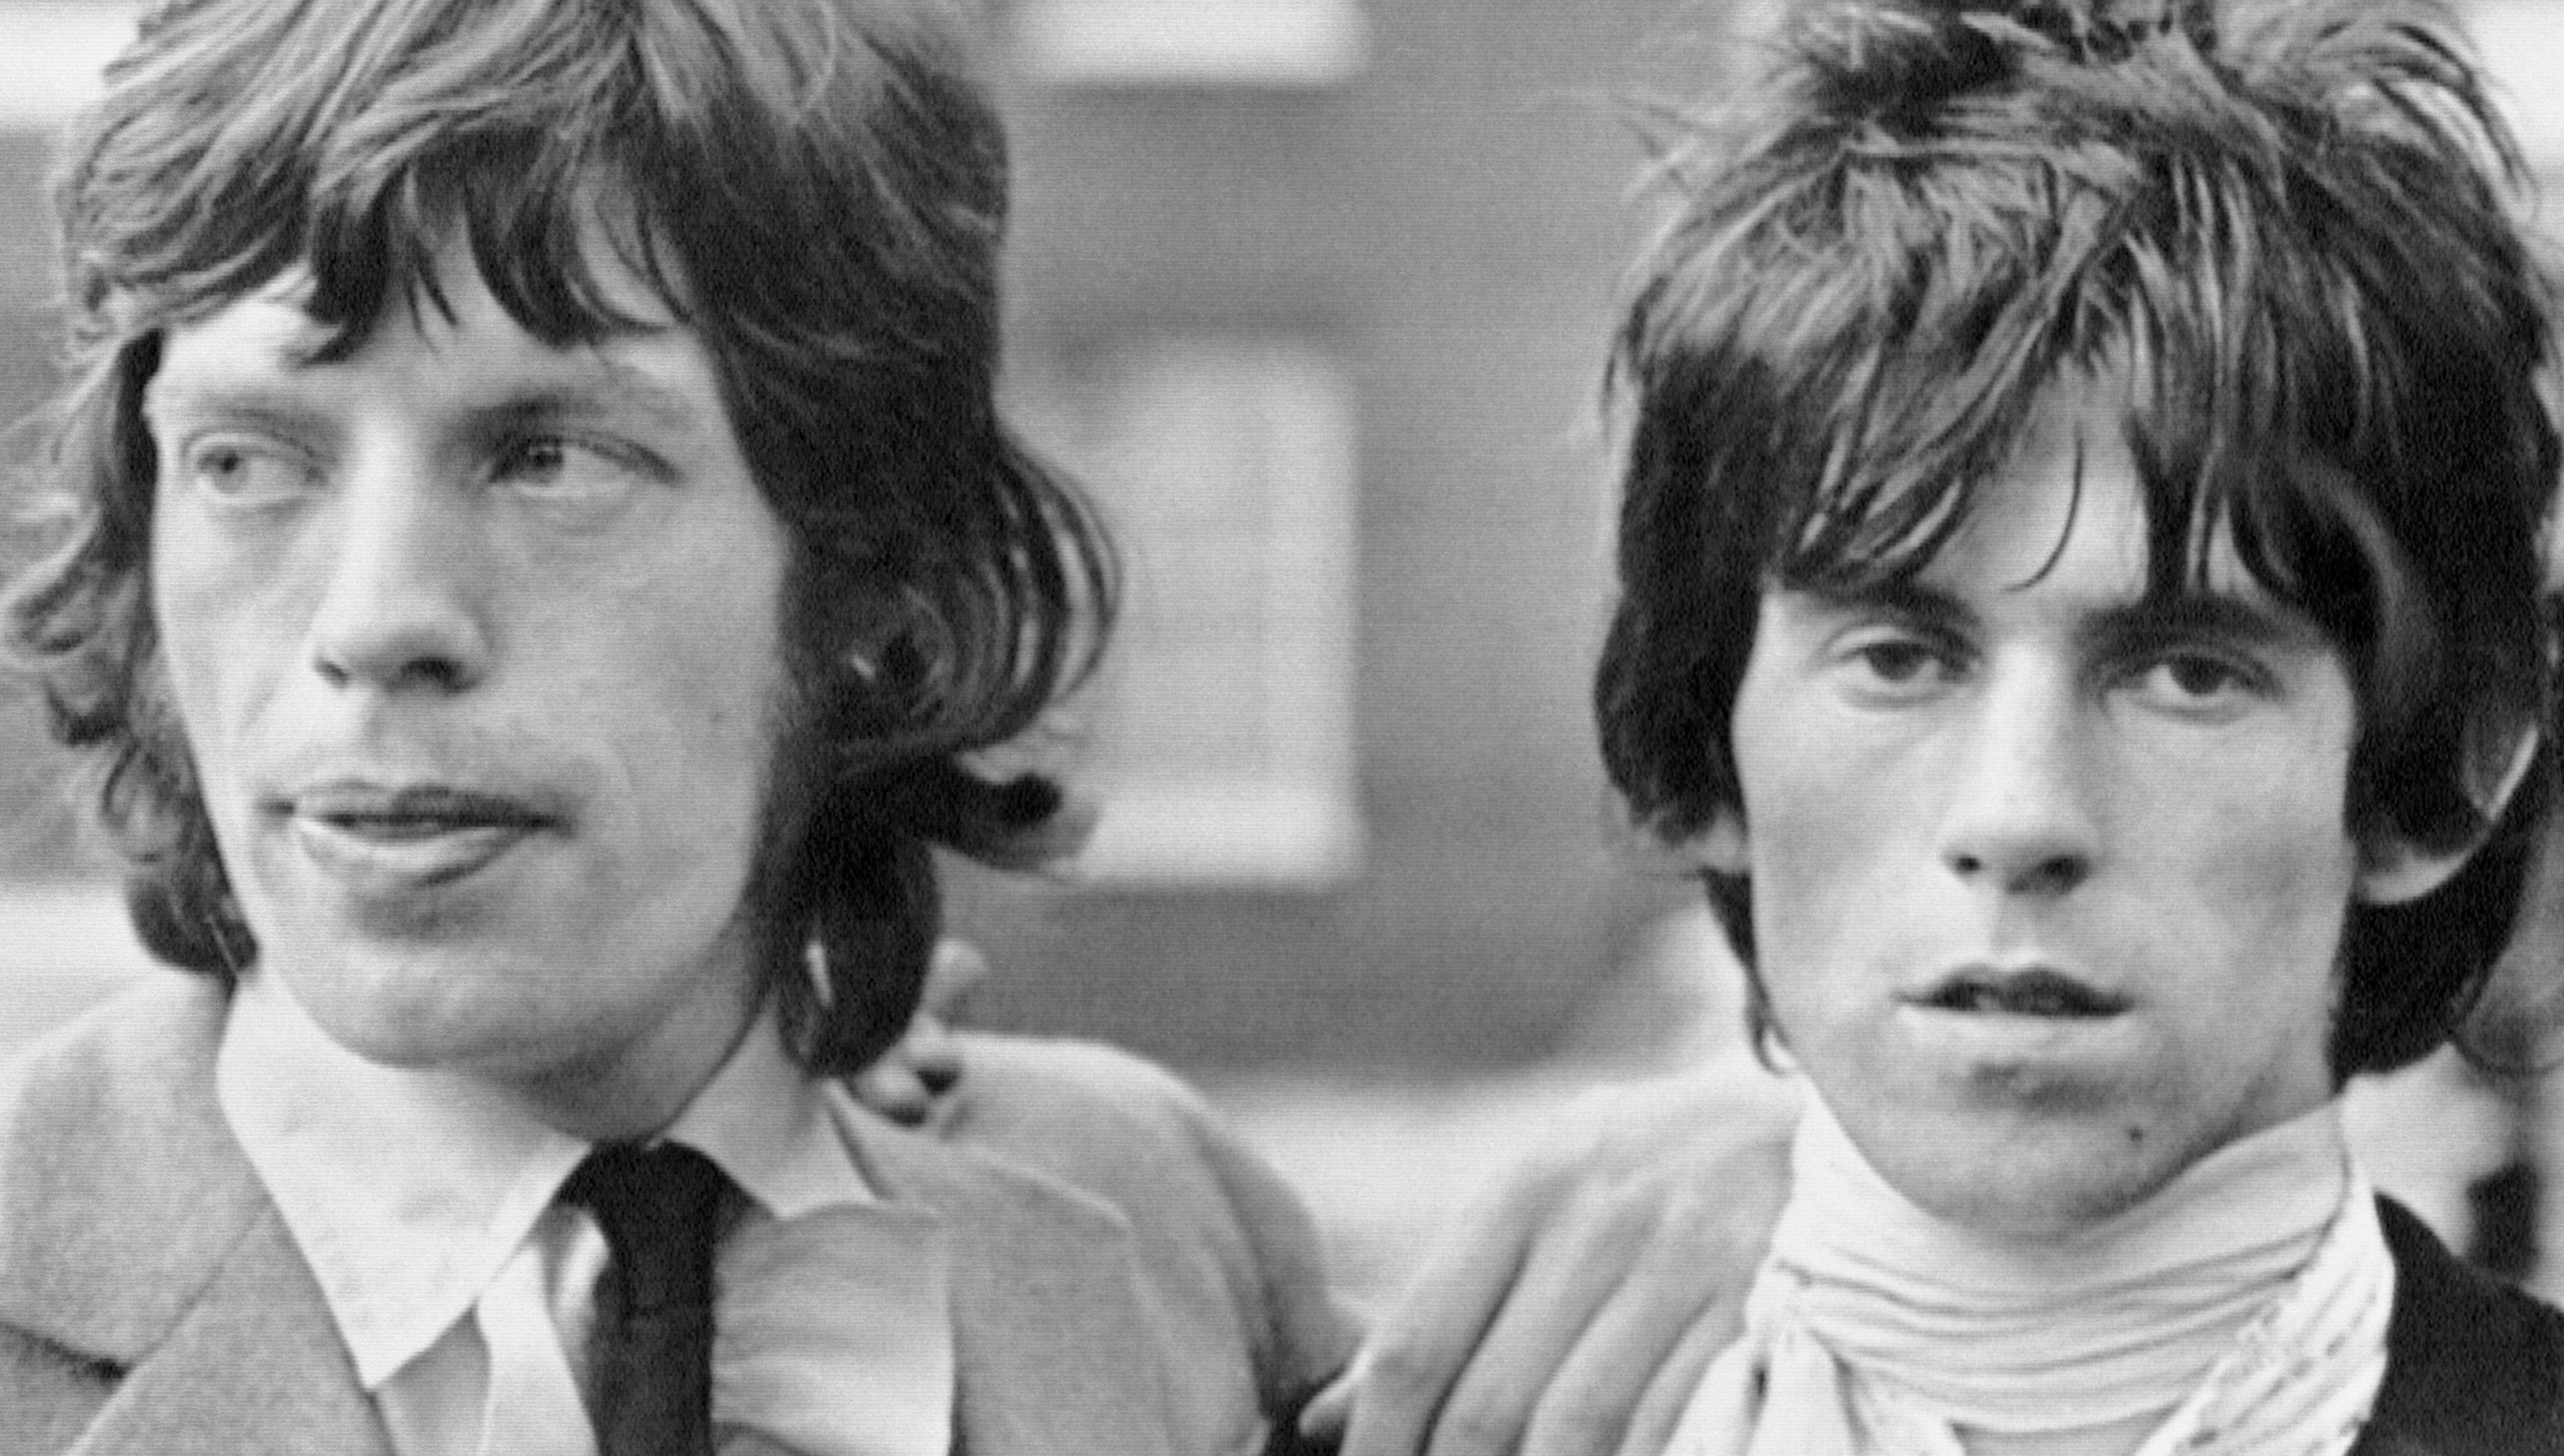 The Rolling Stones' Mick Jagger and Keith Richards in front of a building